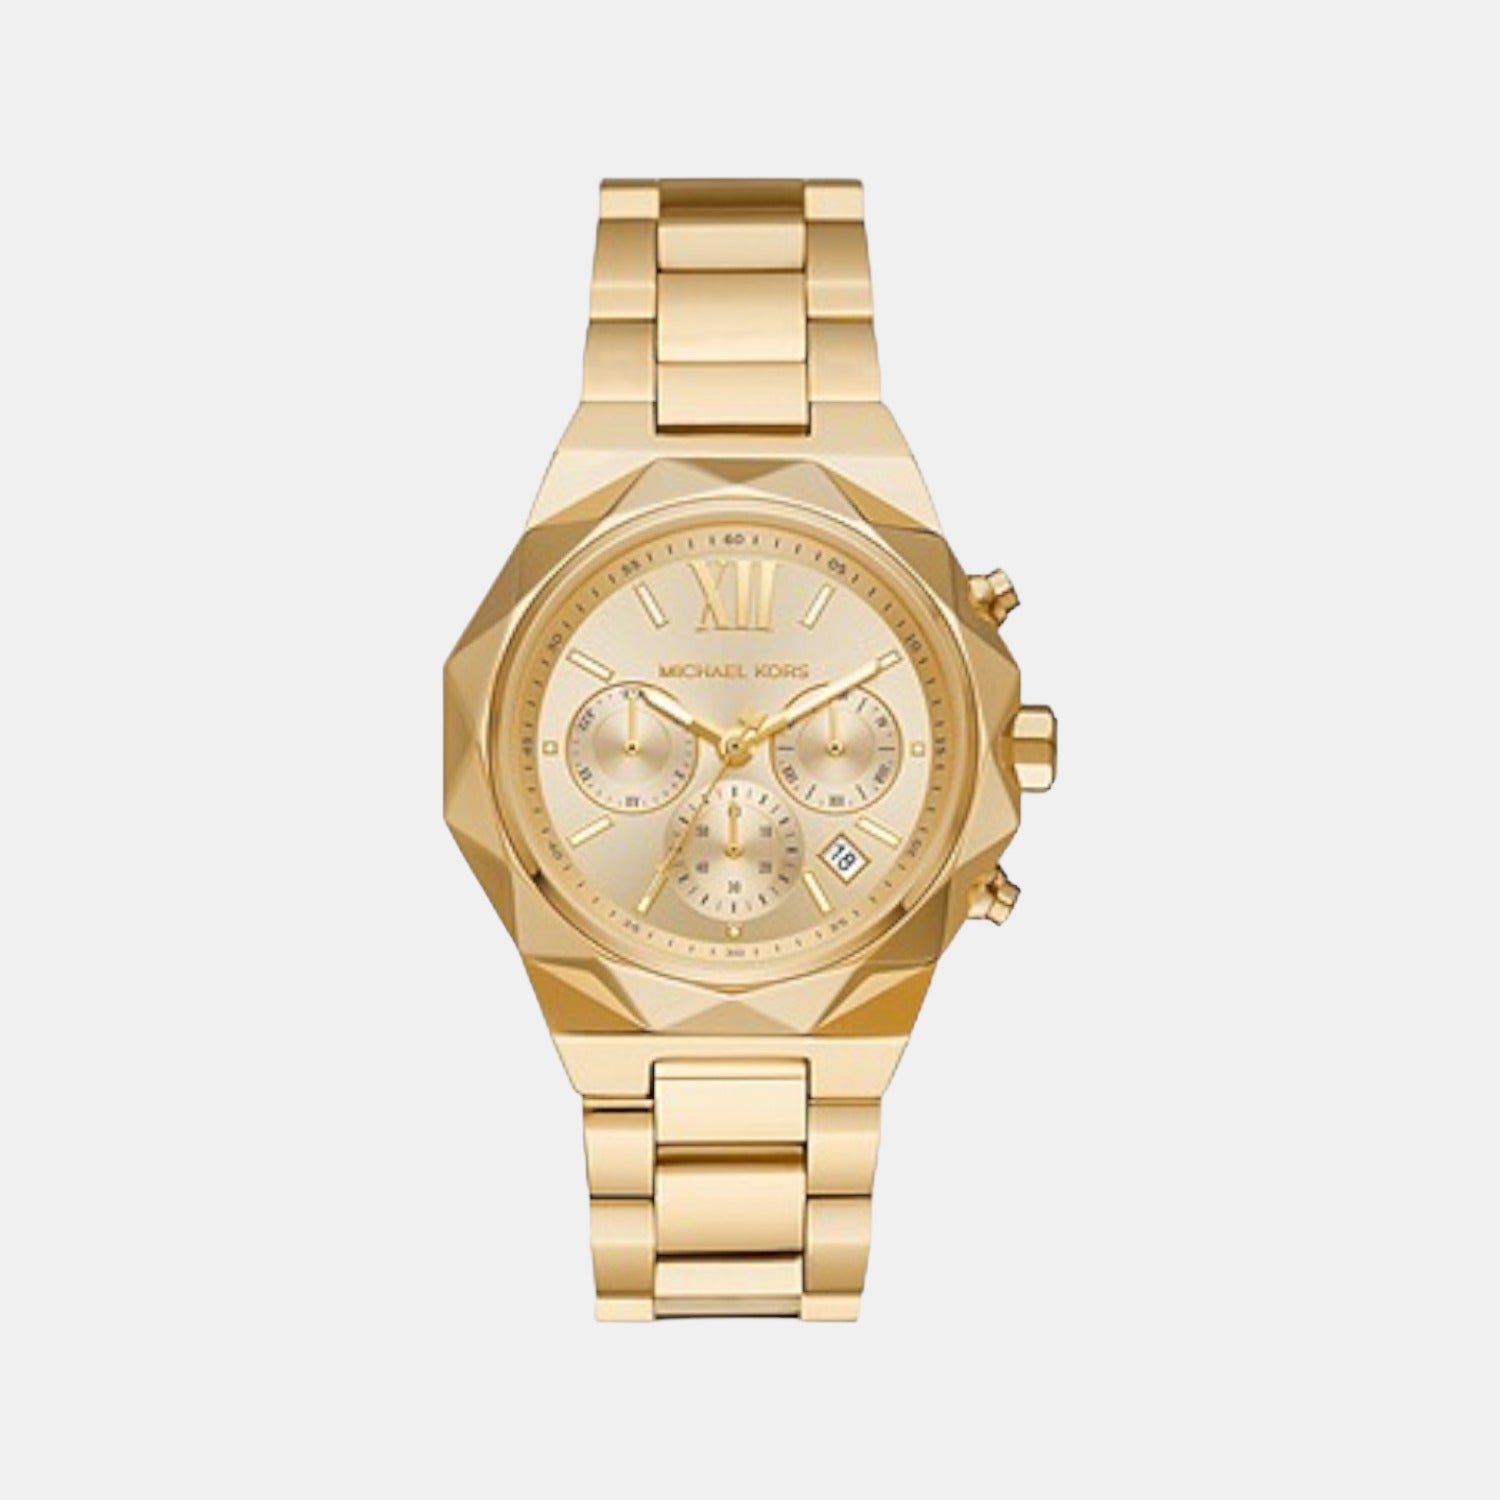 Female Gold Stainless Steel Chronograph Watch MK4690